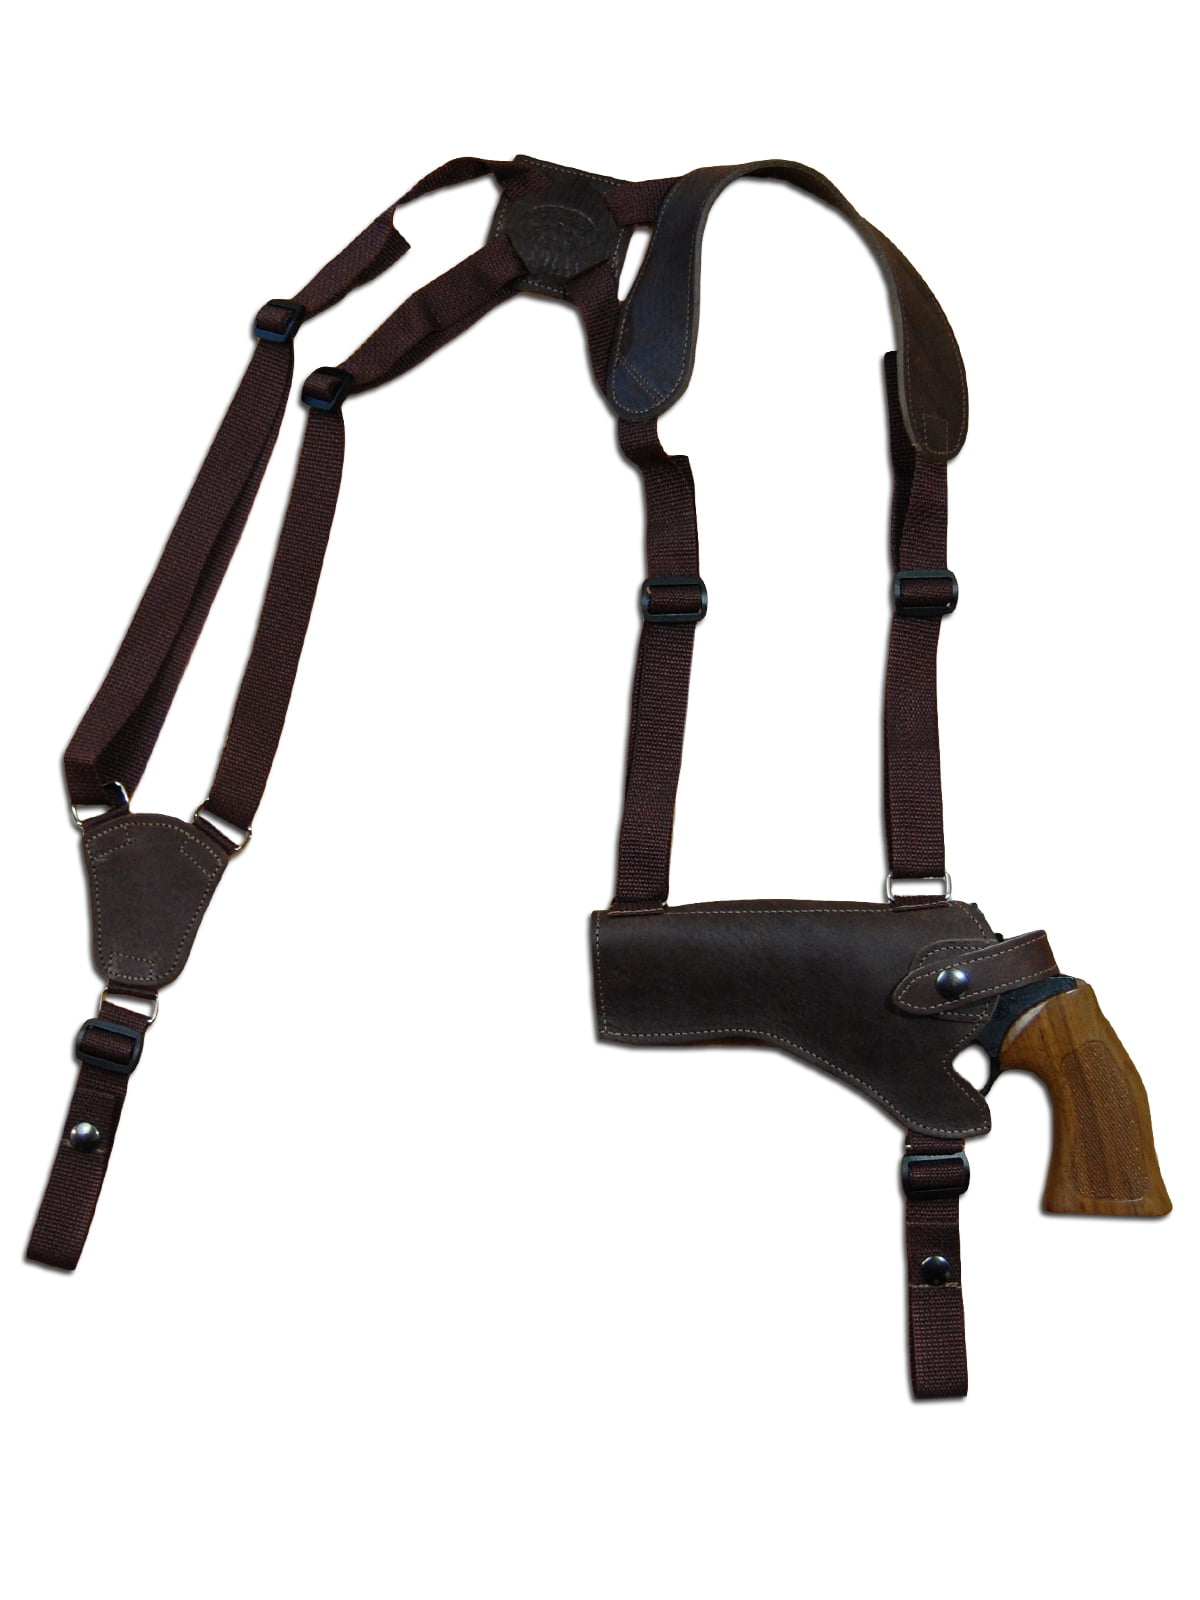 NEW Barsony Brown Leather Horizontal Shoulder Holster Dan Wesson EAA 4" Revolver 